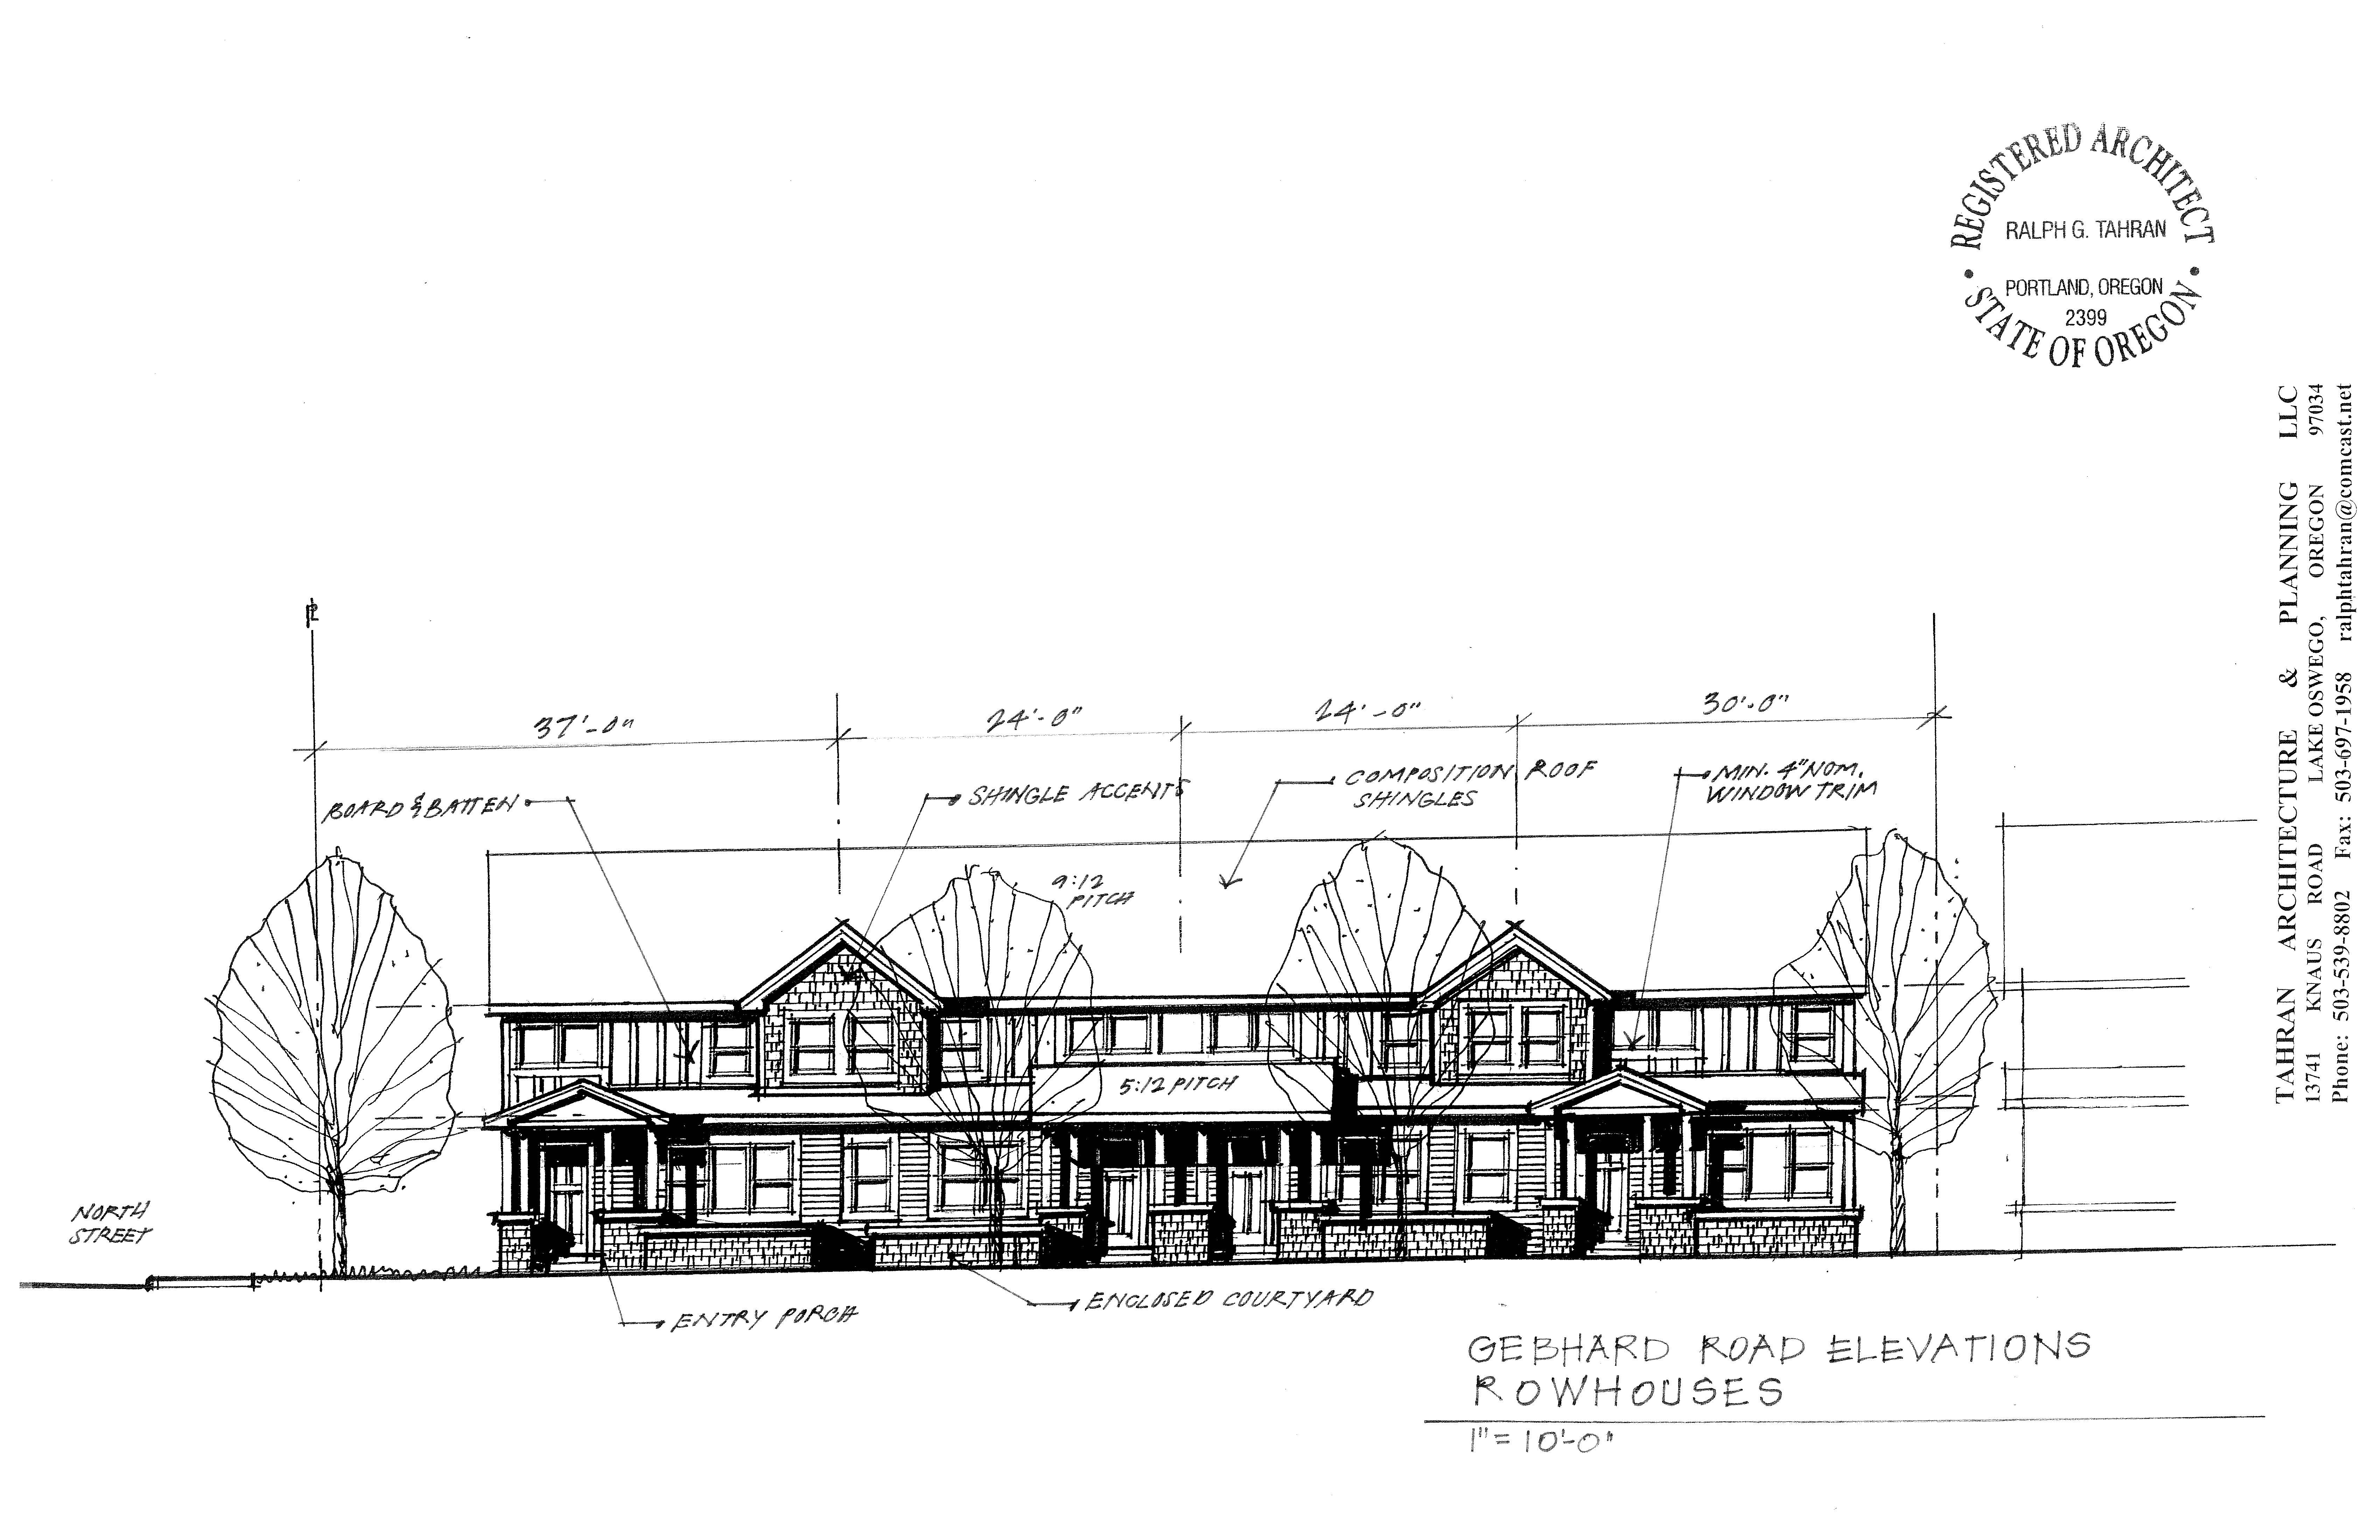 Rowhouse Elevations - Front